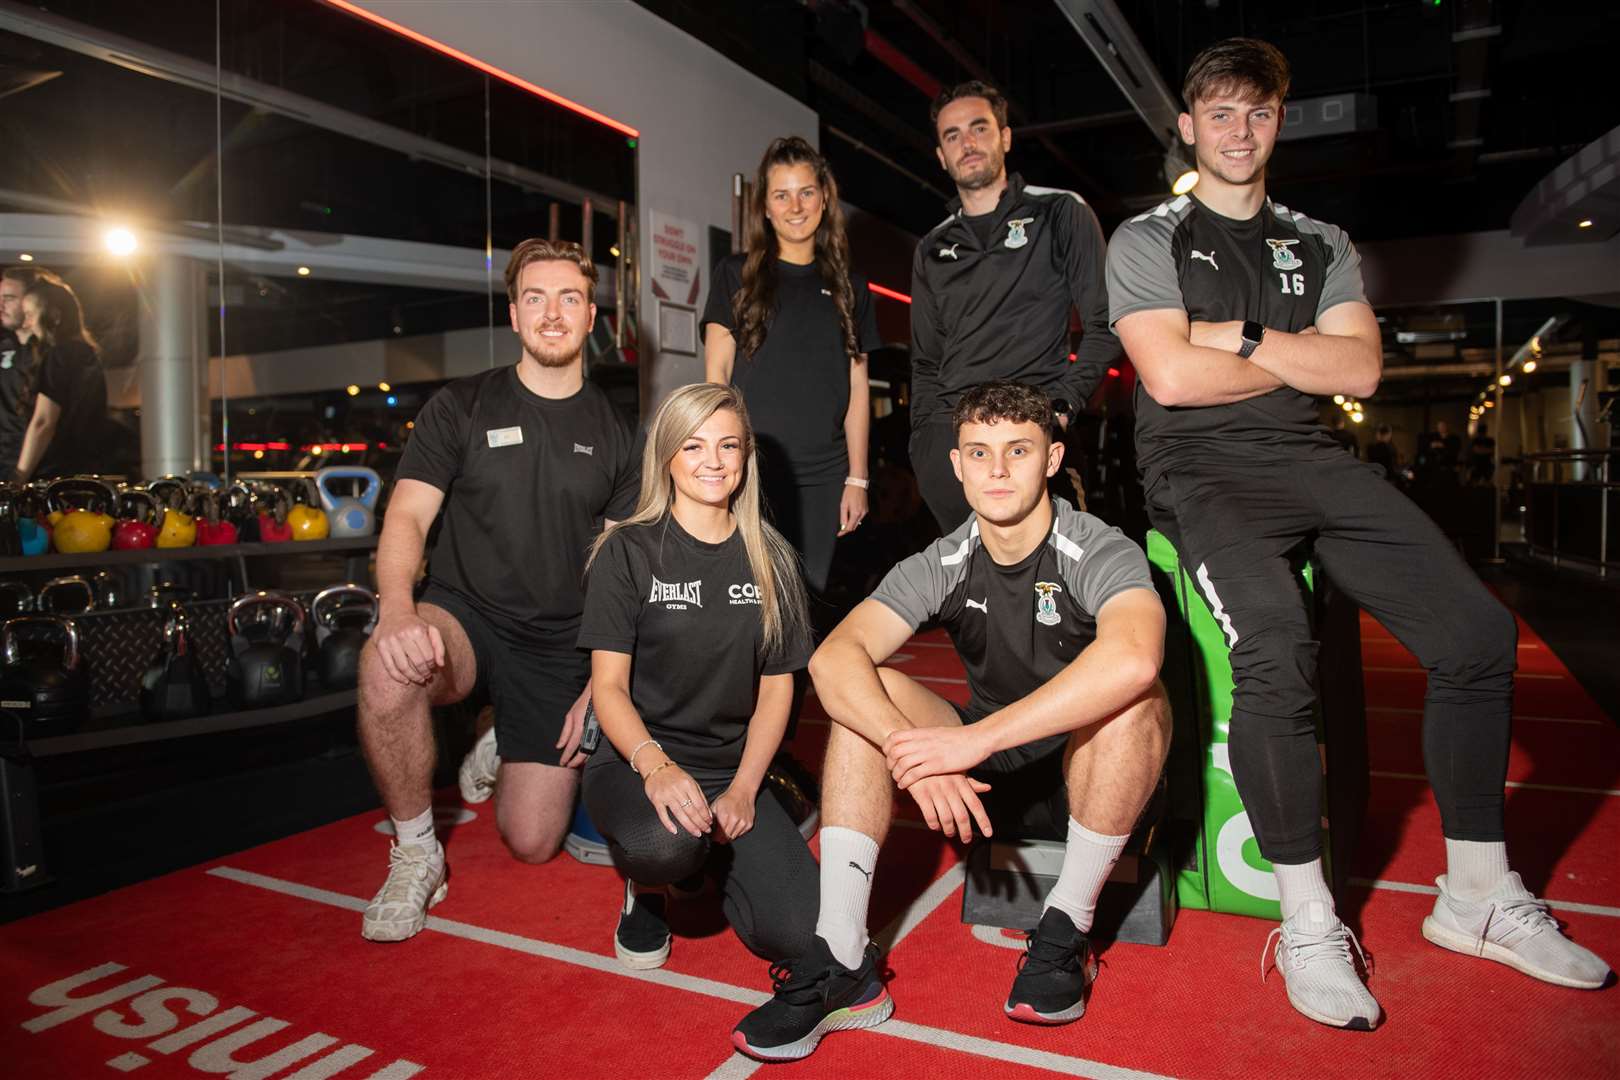 (back, lr) Rory Latta- fitness experience manager, Hollie MacIver - Member Experience Manager, Daniel Cluett , Head of Medical ICT, Lewis Hyde, ICT football player, (front, lr) Katie Taylor - Assistant General Manager, Cammy Harper ICT football player. Picture: Callum Mackay..